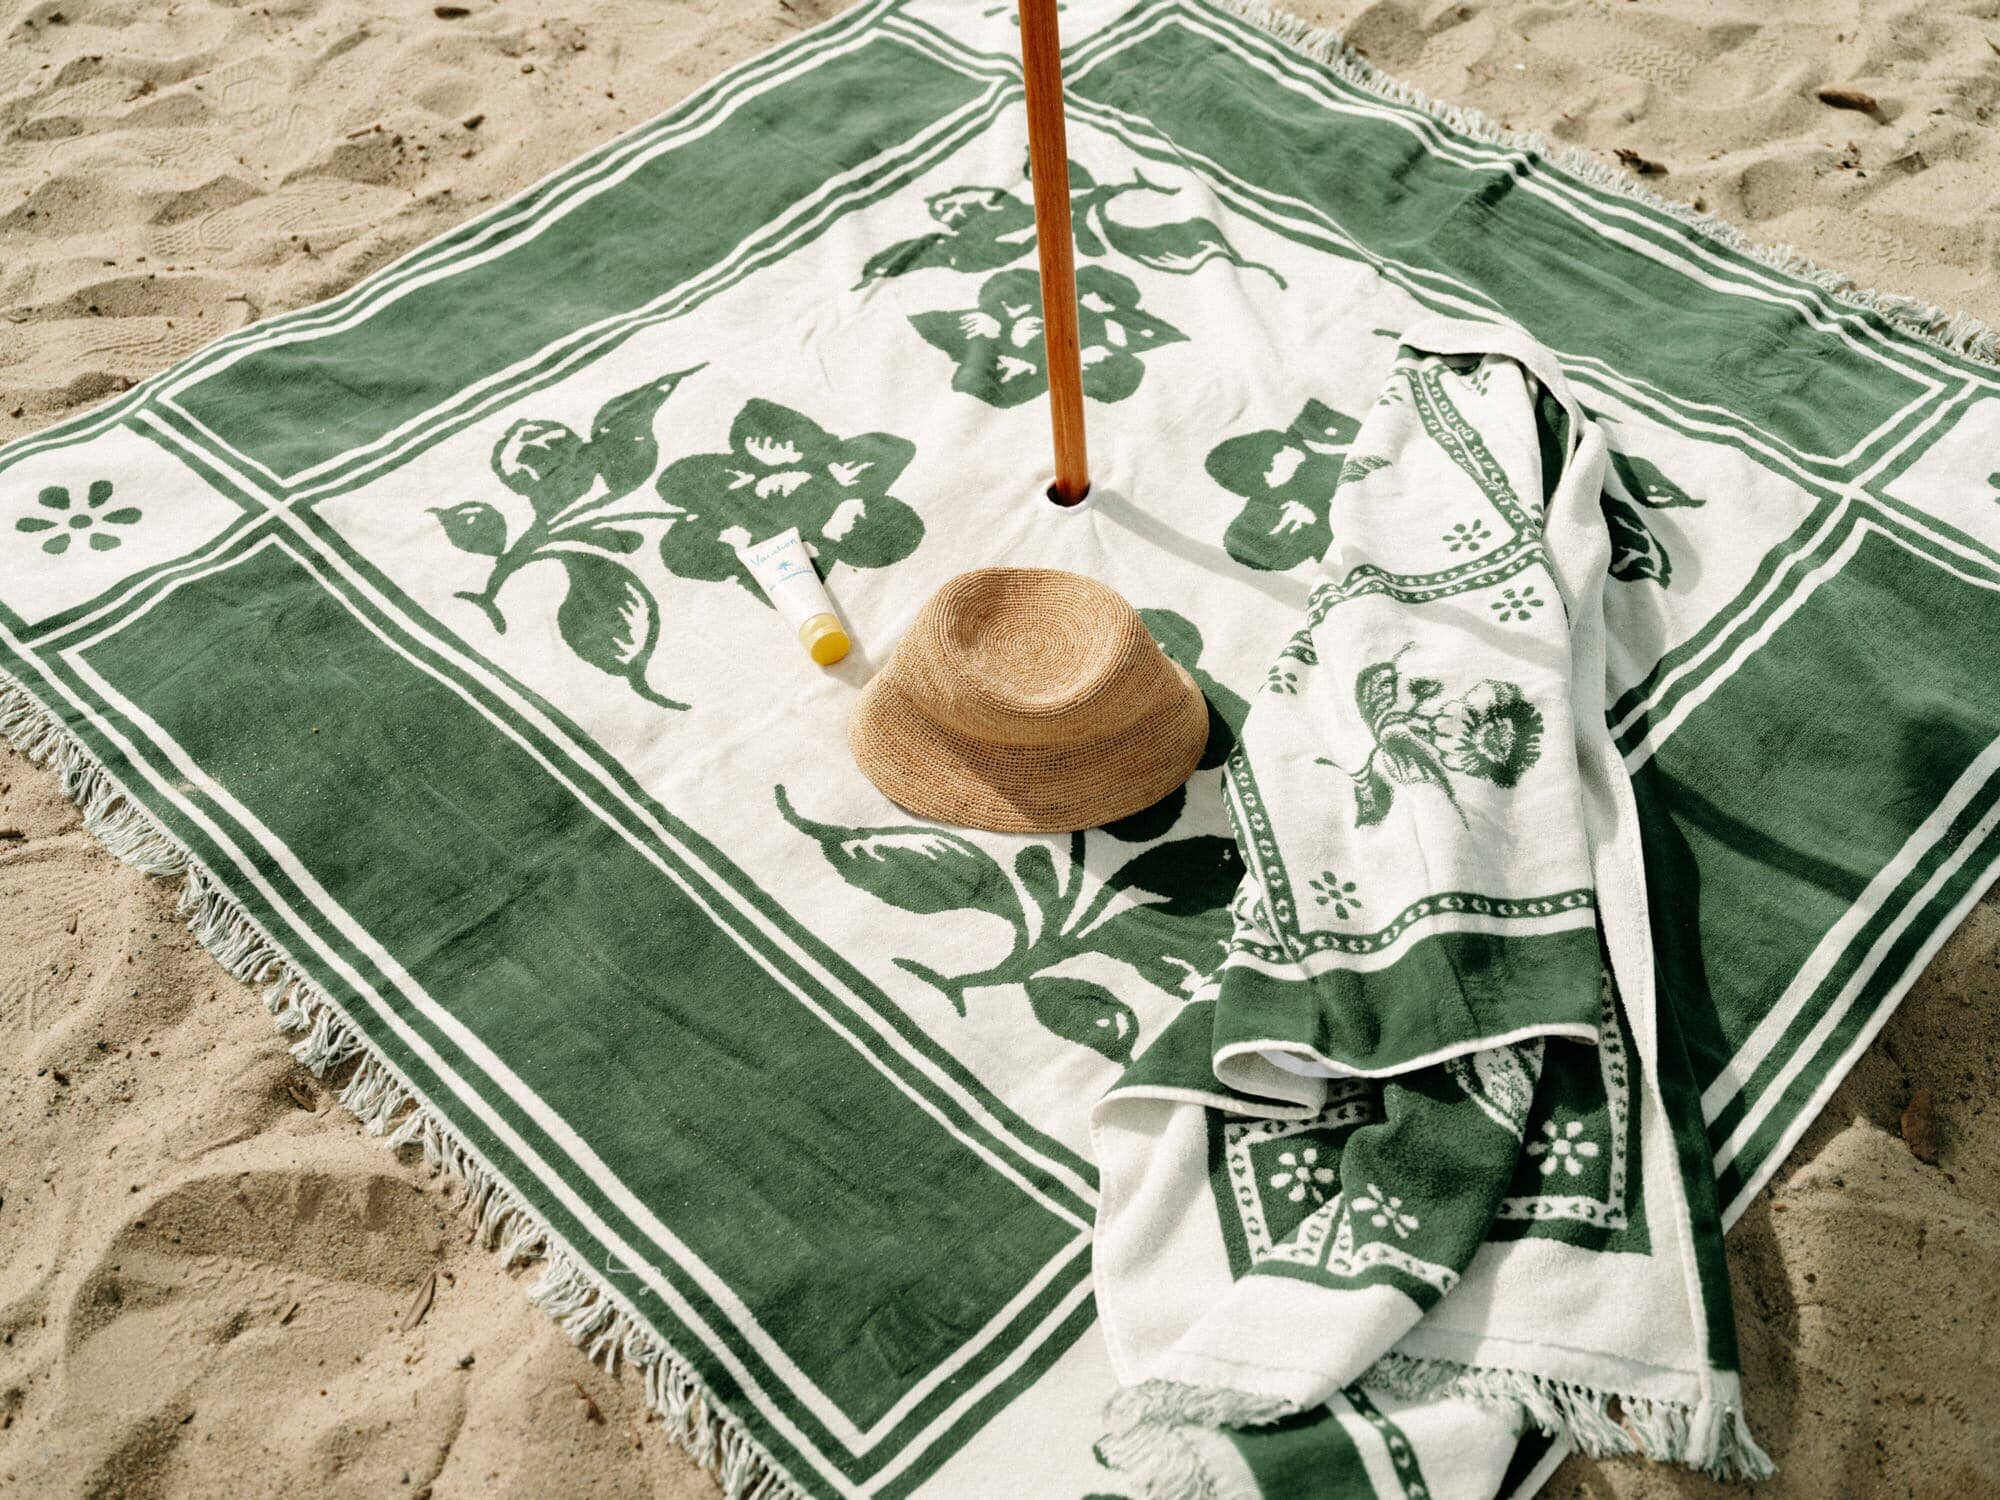 Blanket and towel at the beach